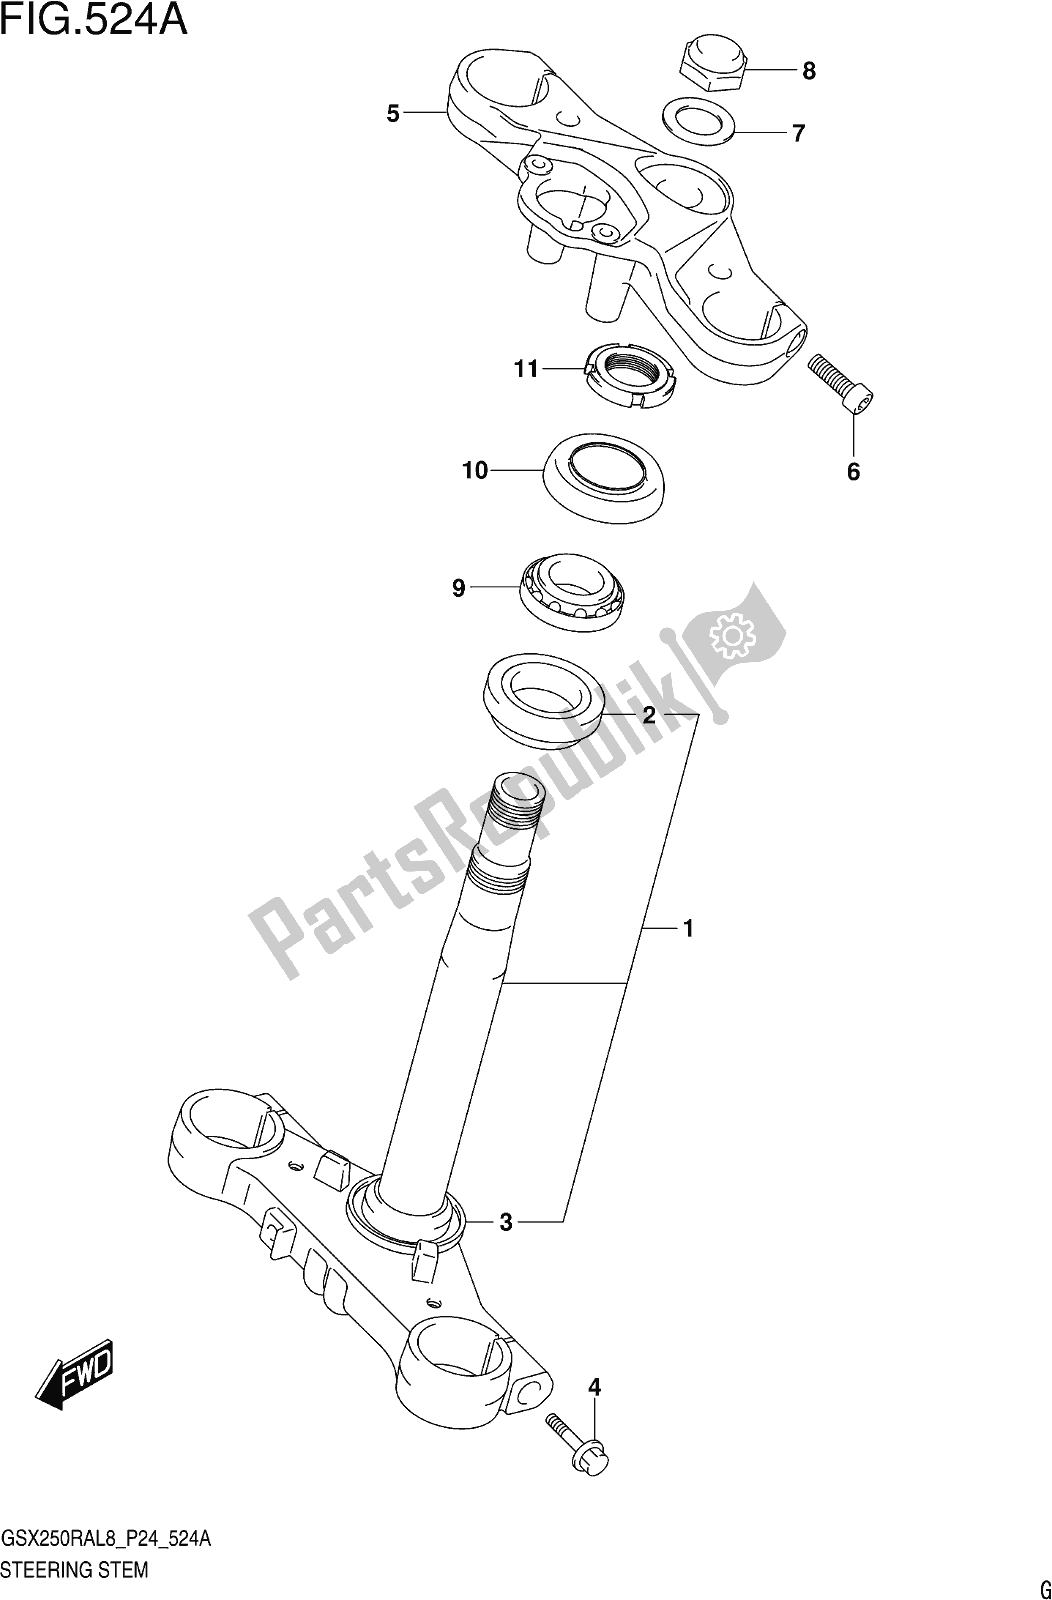 All parts for the Fig. 524a Steering Stem of the Suzuki GW 250 RAZ 2018